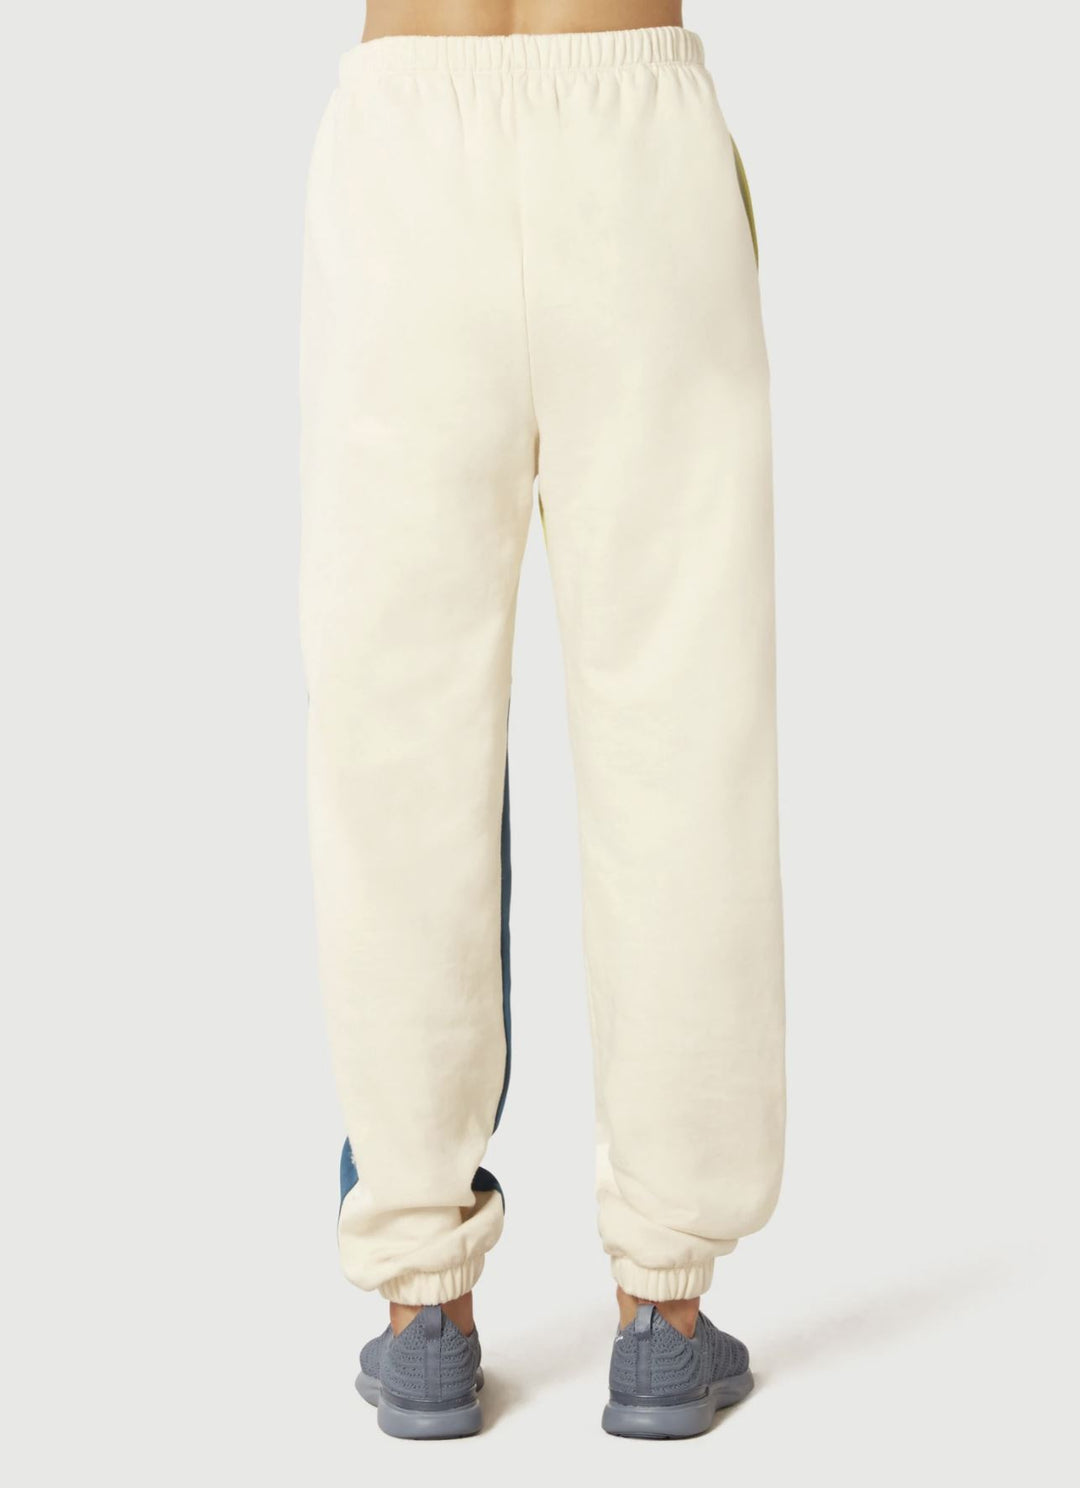 NUX Color Block Ivory Combo Joggers | Style # P0279 | Made in the USA | Classy Cozy Cool Women’s Clothing Boutique | Jogging Set